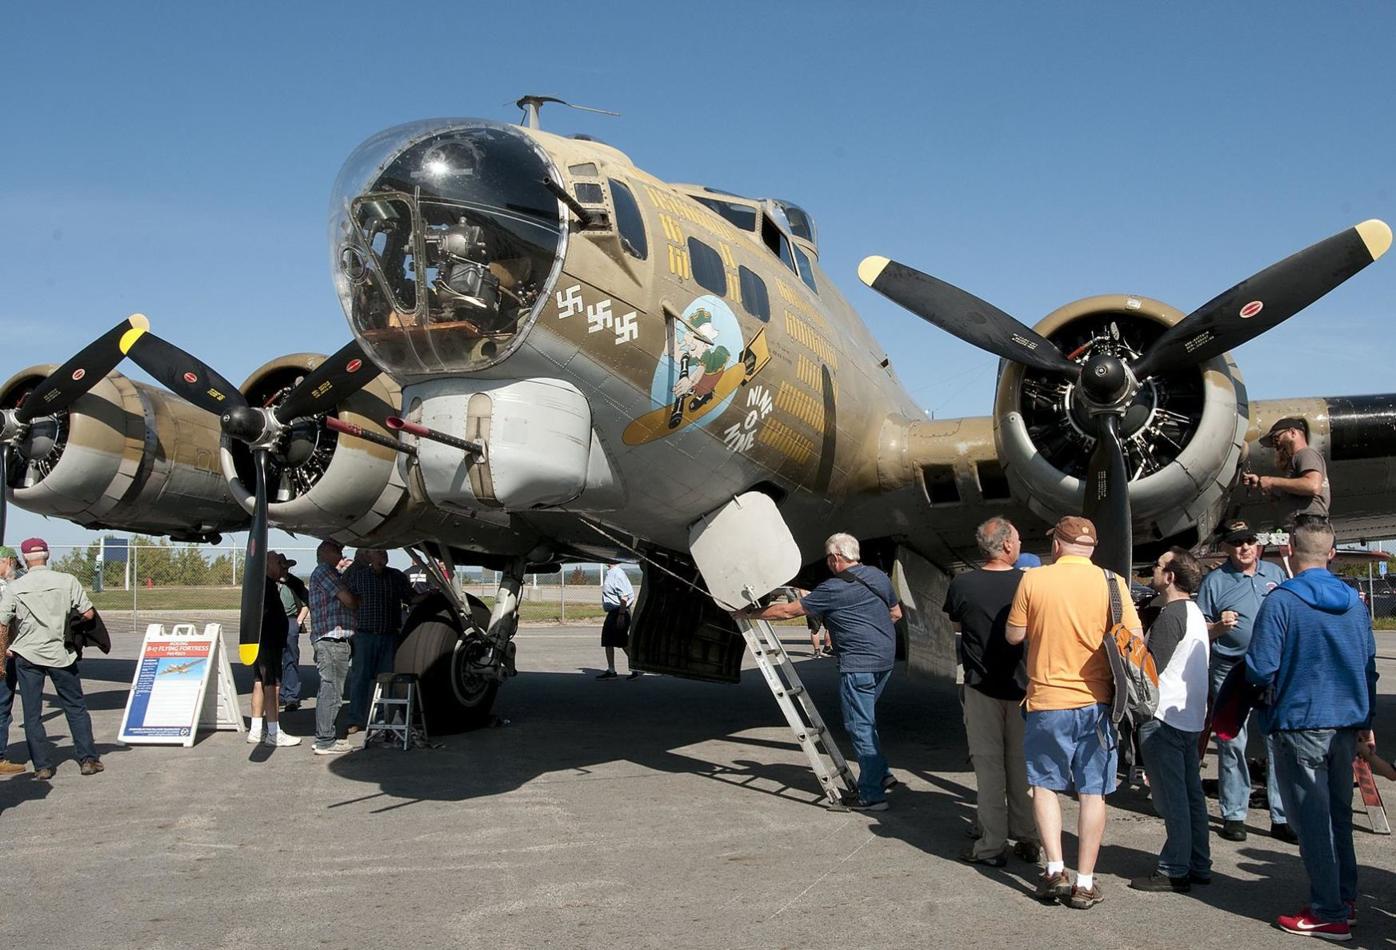 B-17 crew lost lives in Jersey crash